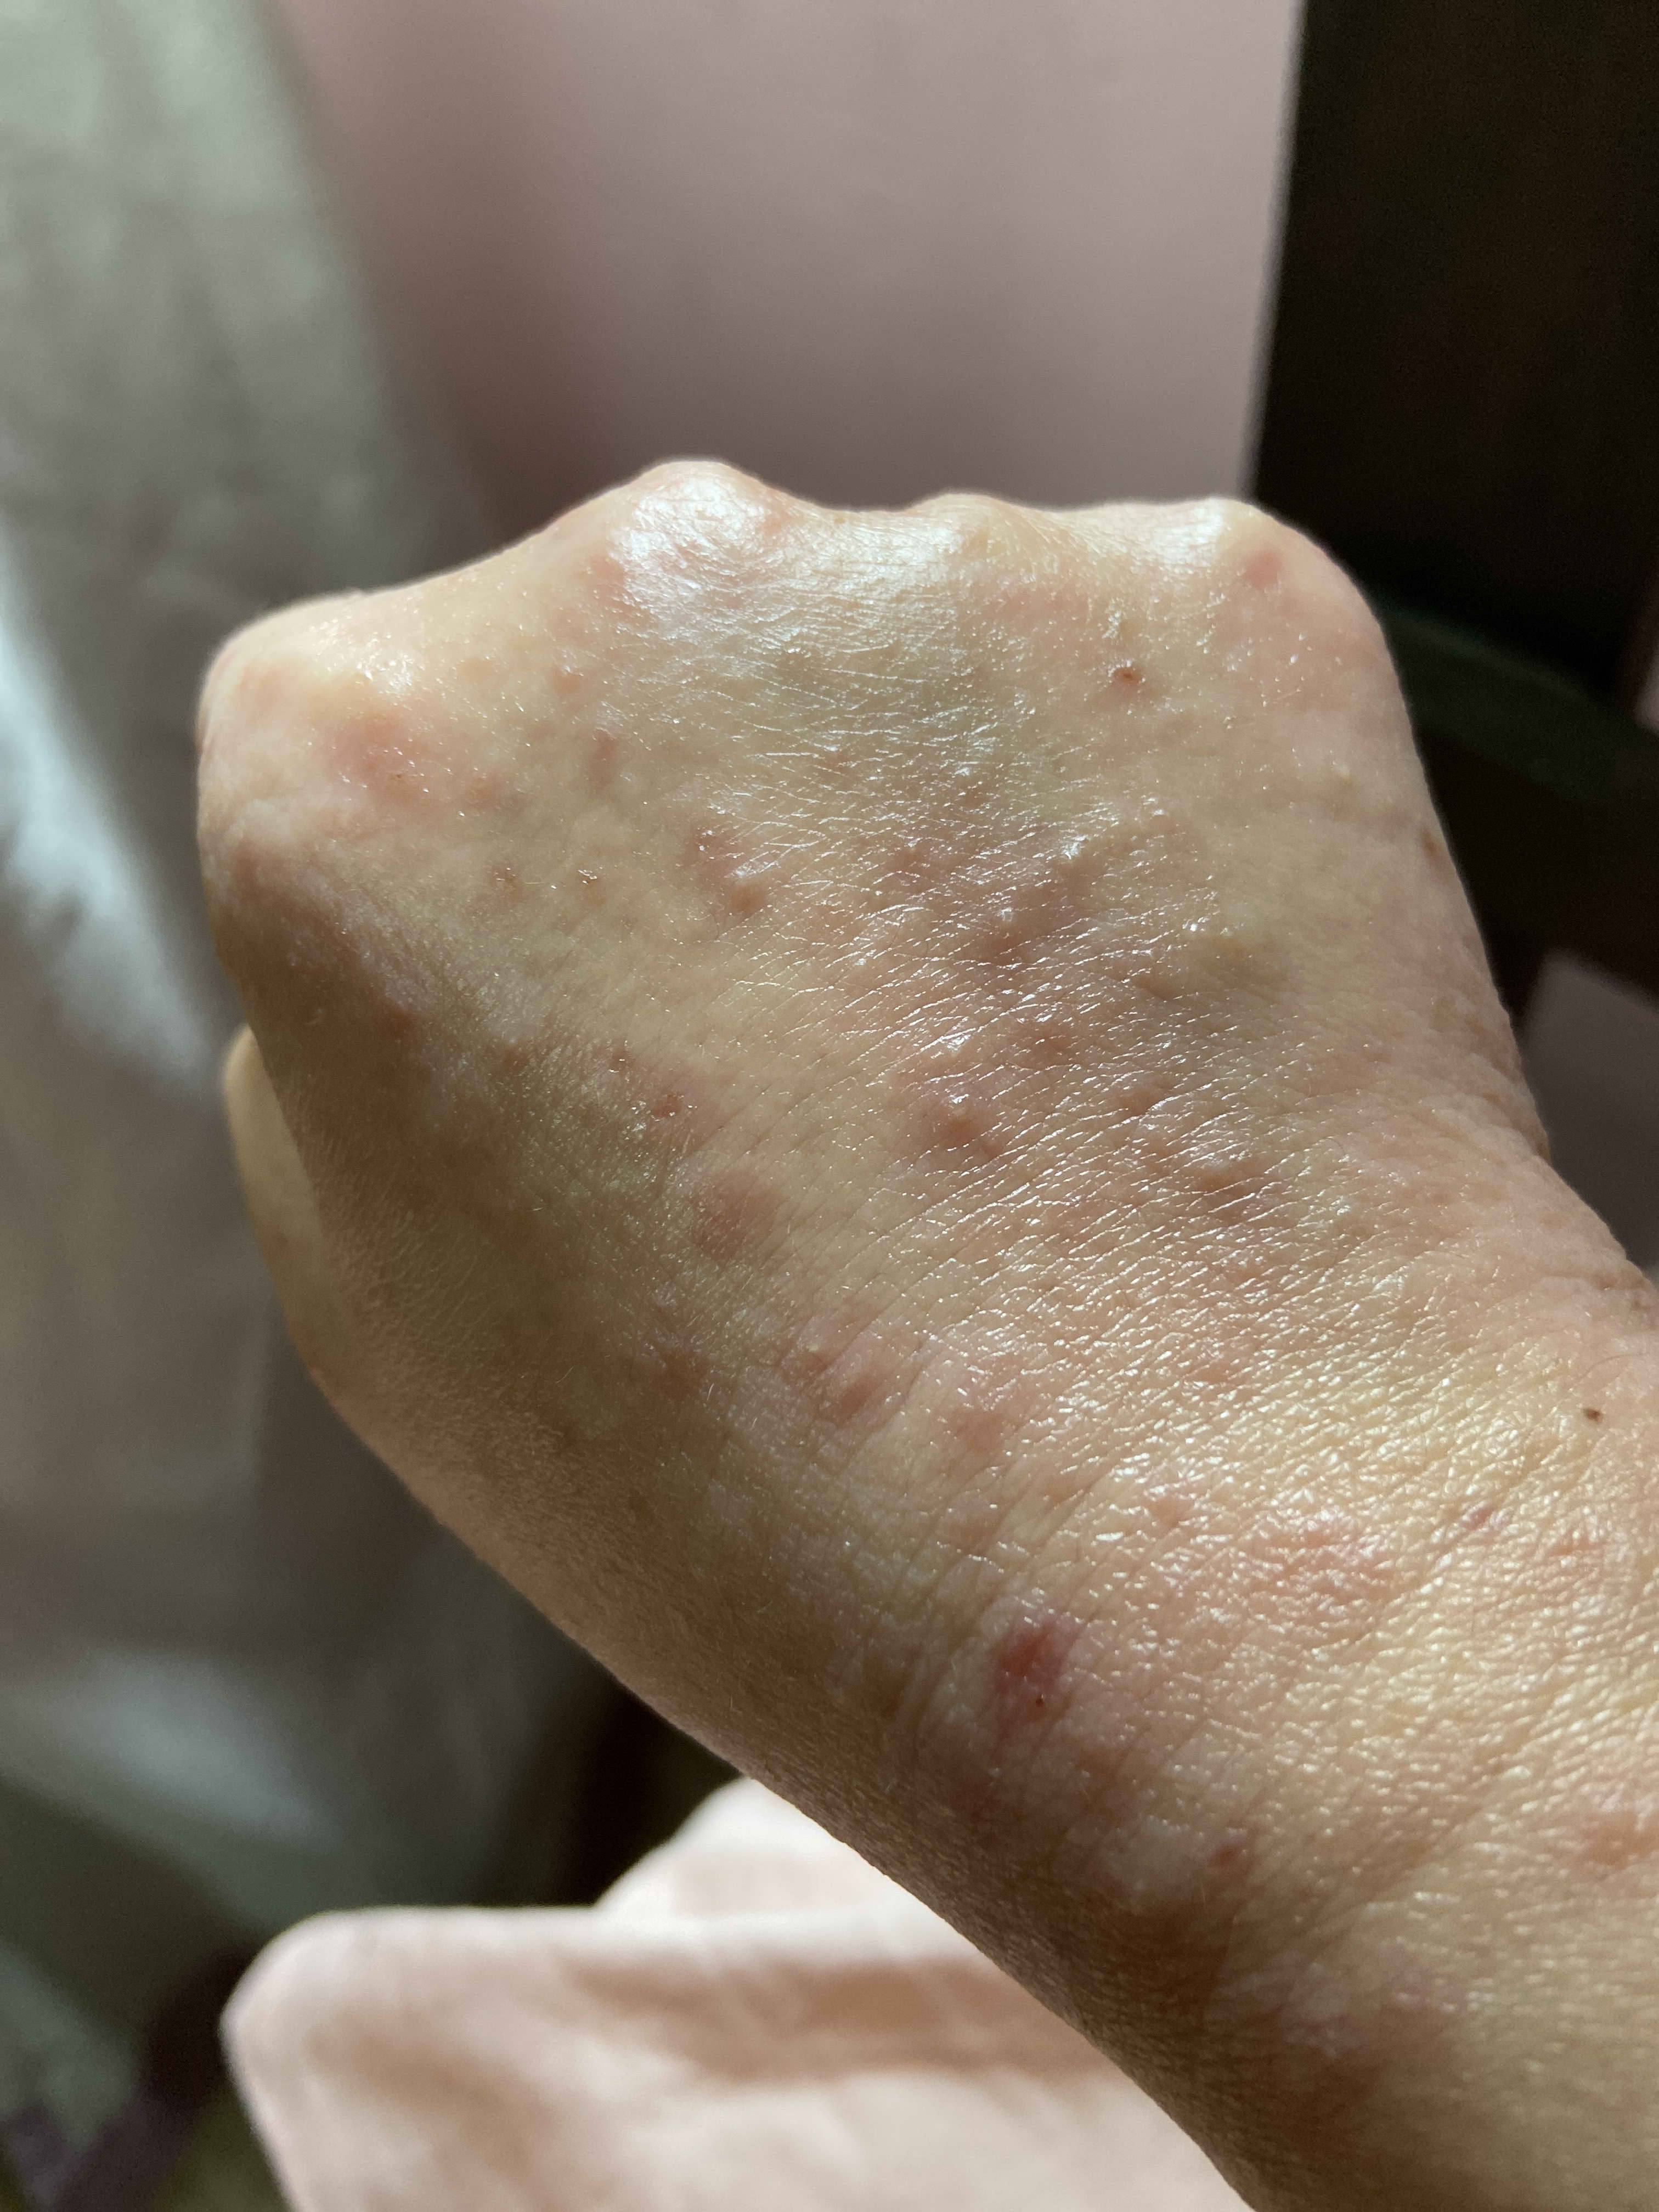 What Do I Do If I Suffer From Eczema And My Hand And Arm Suddenly Develop A Lot Of Rashes 4088